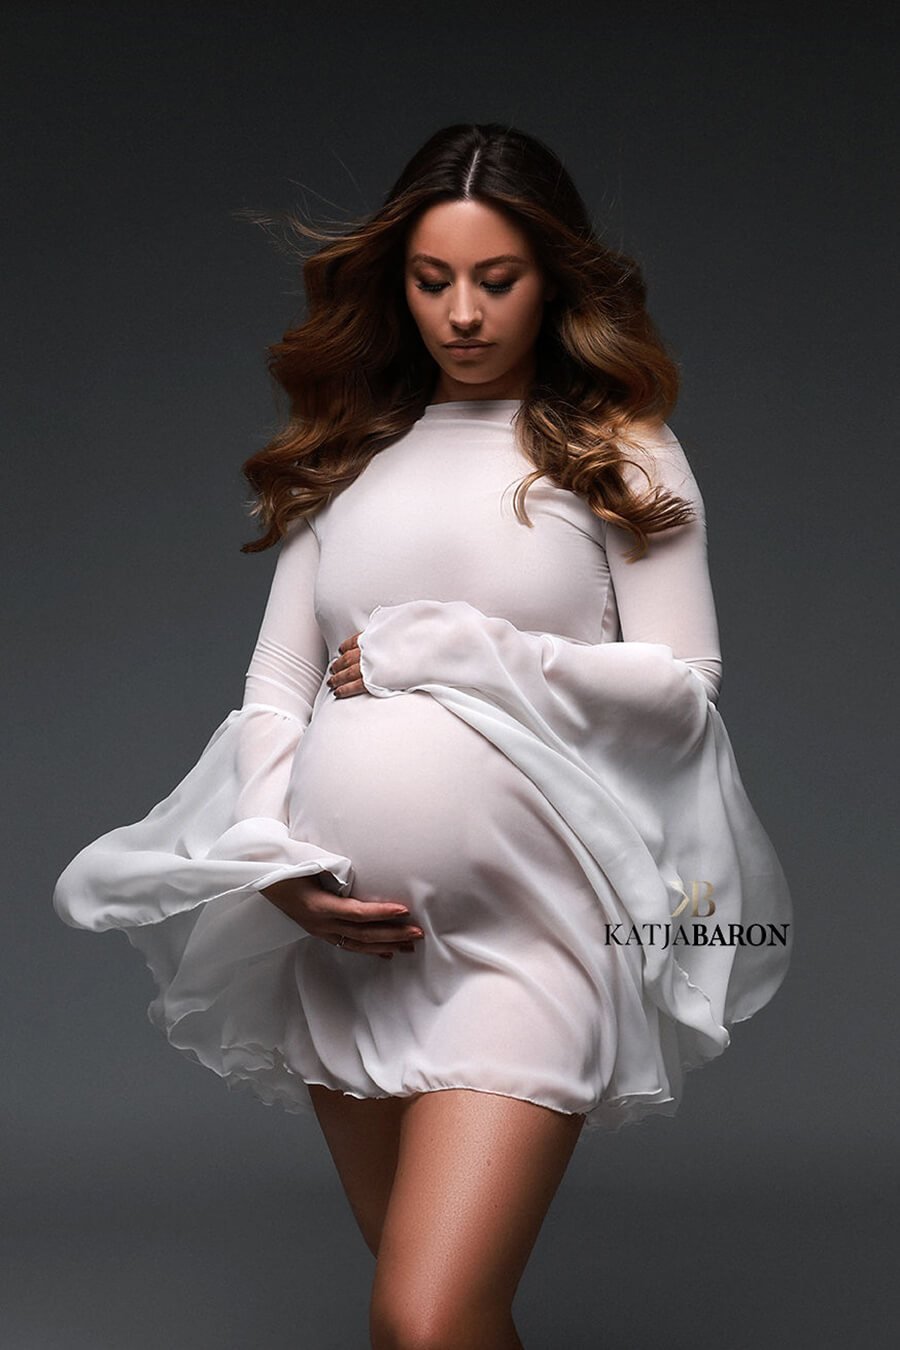 A pregnant woman is wearing a short wavy white dress. She has her hands around her belly and is looking down